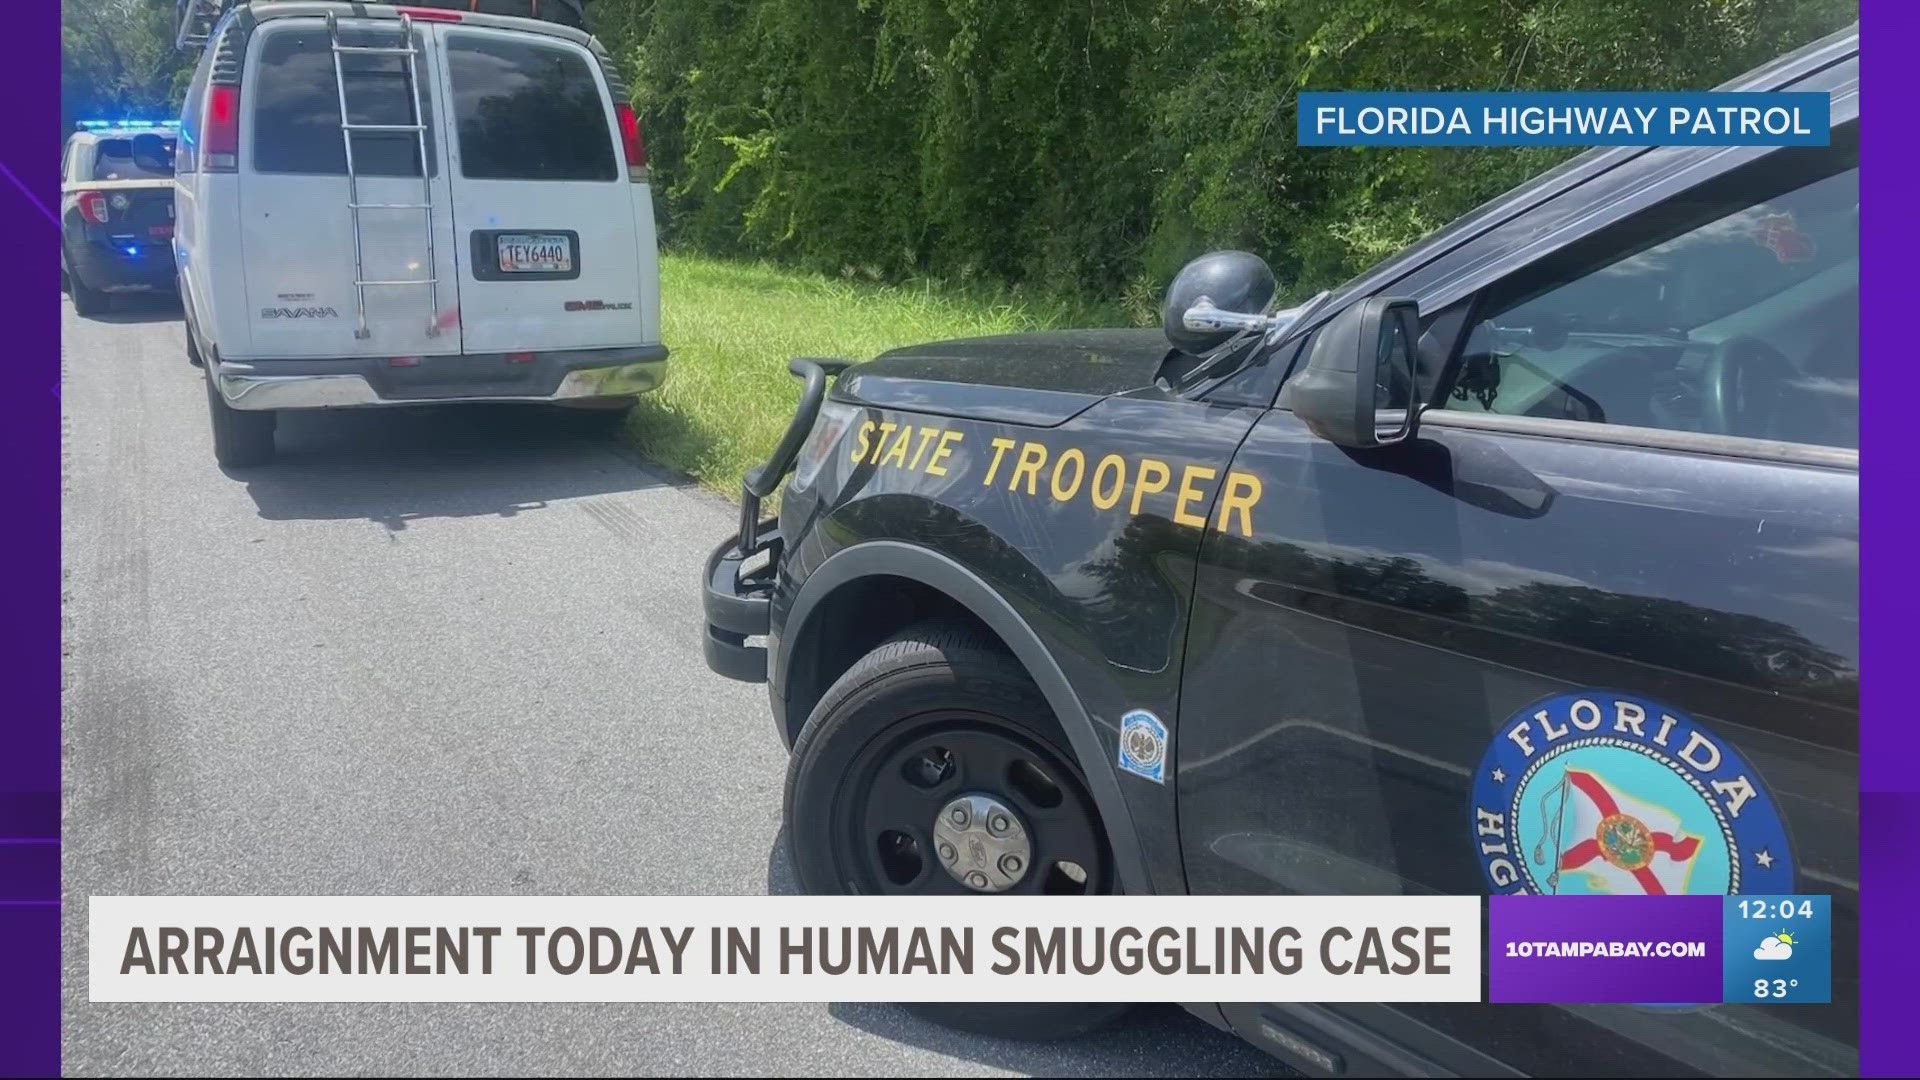 A 41-year-old man is now in the Hernando County Jail facing four counts of human smuggling and driving without a license.